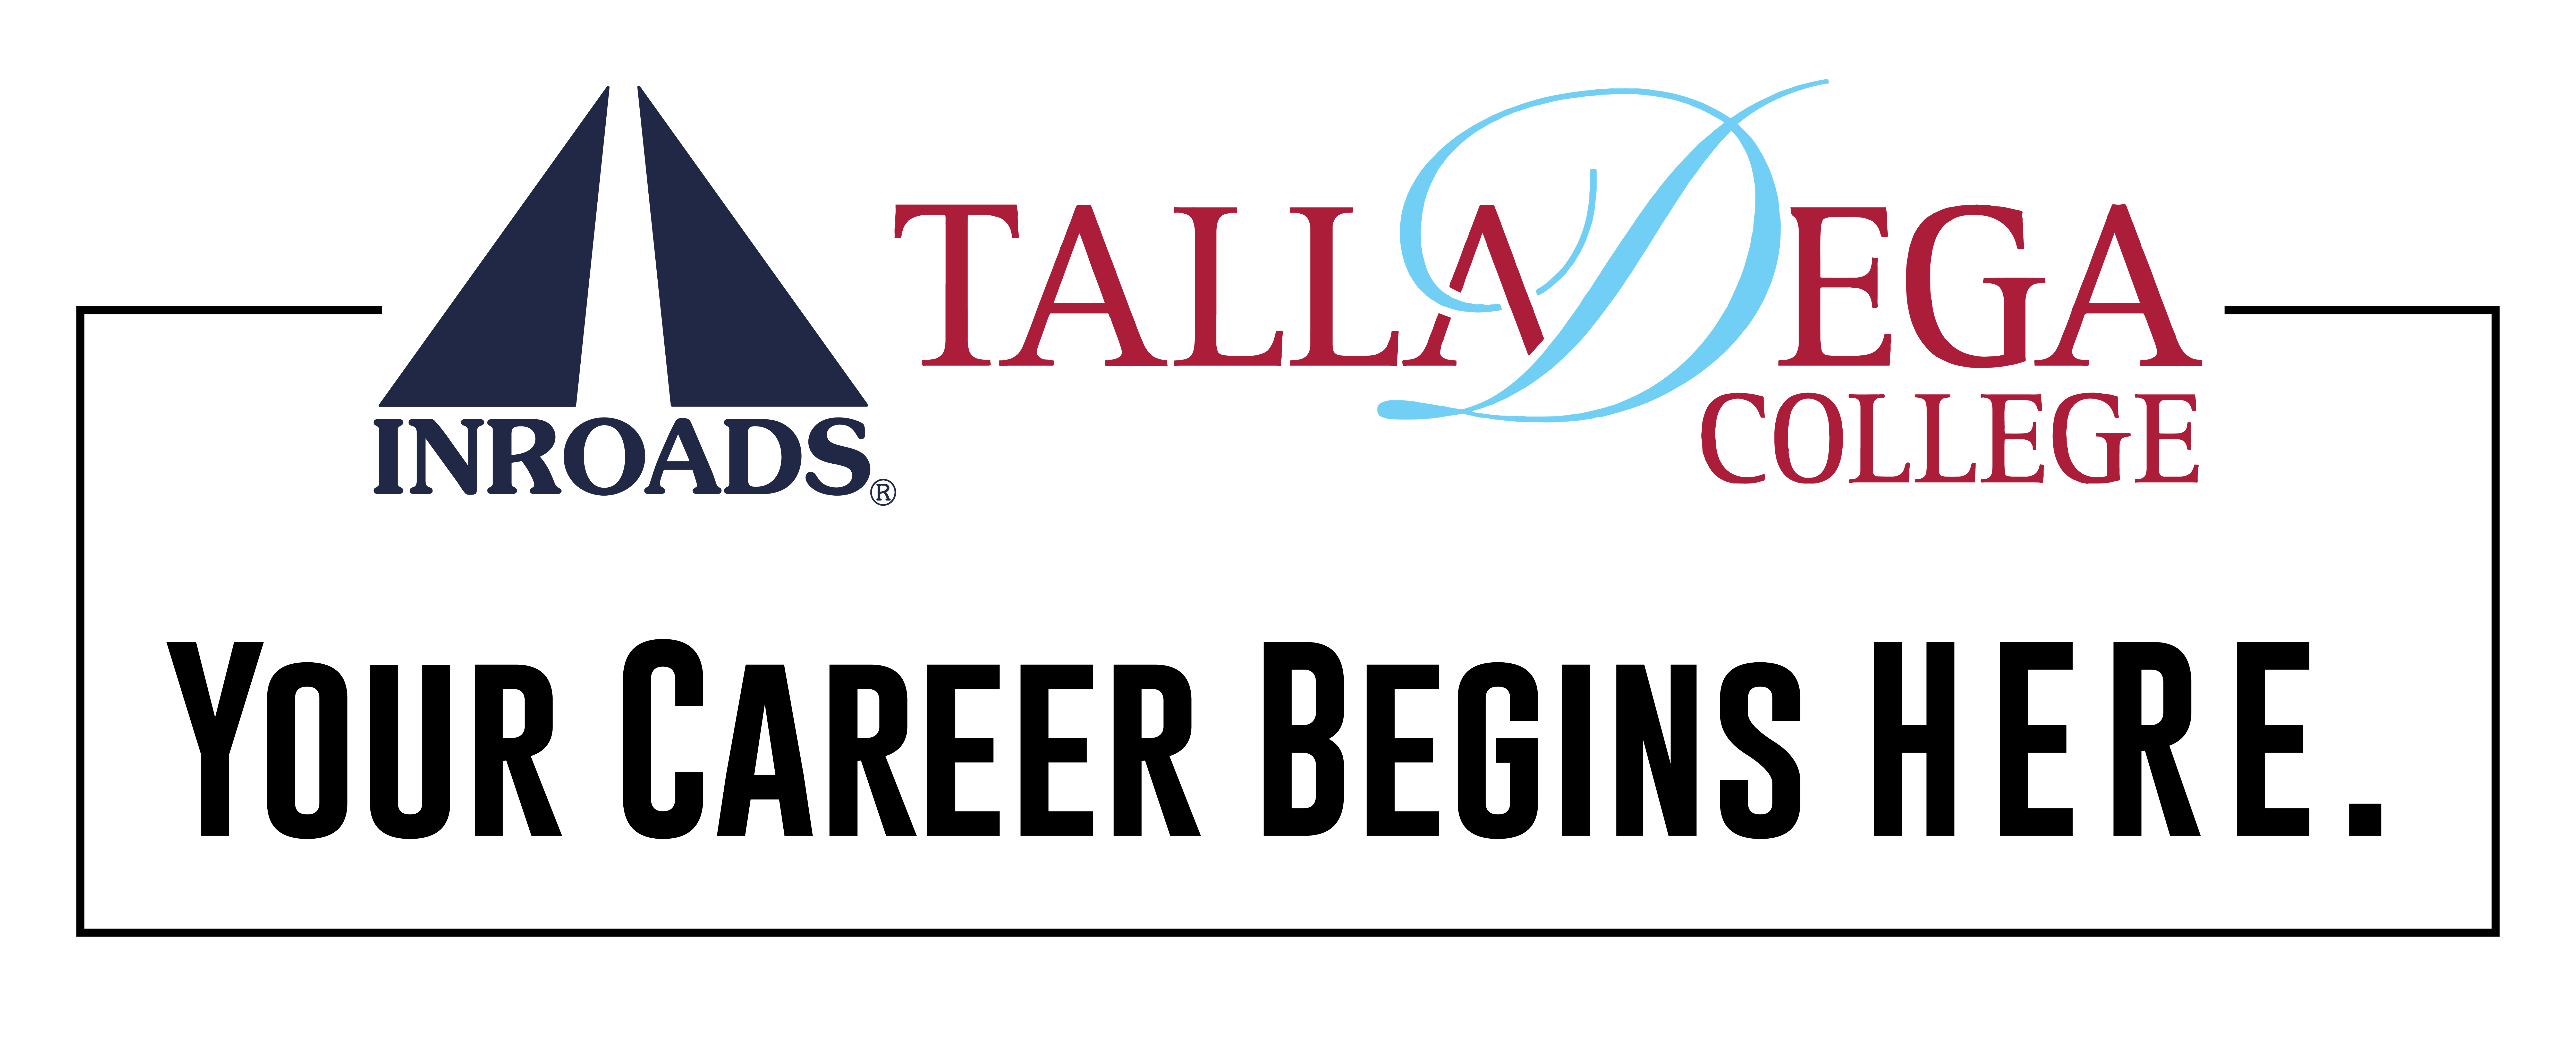 Inroads Logo - Talladega College and INROADS Launch Career Pathways Initiative ...